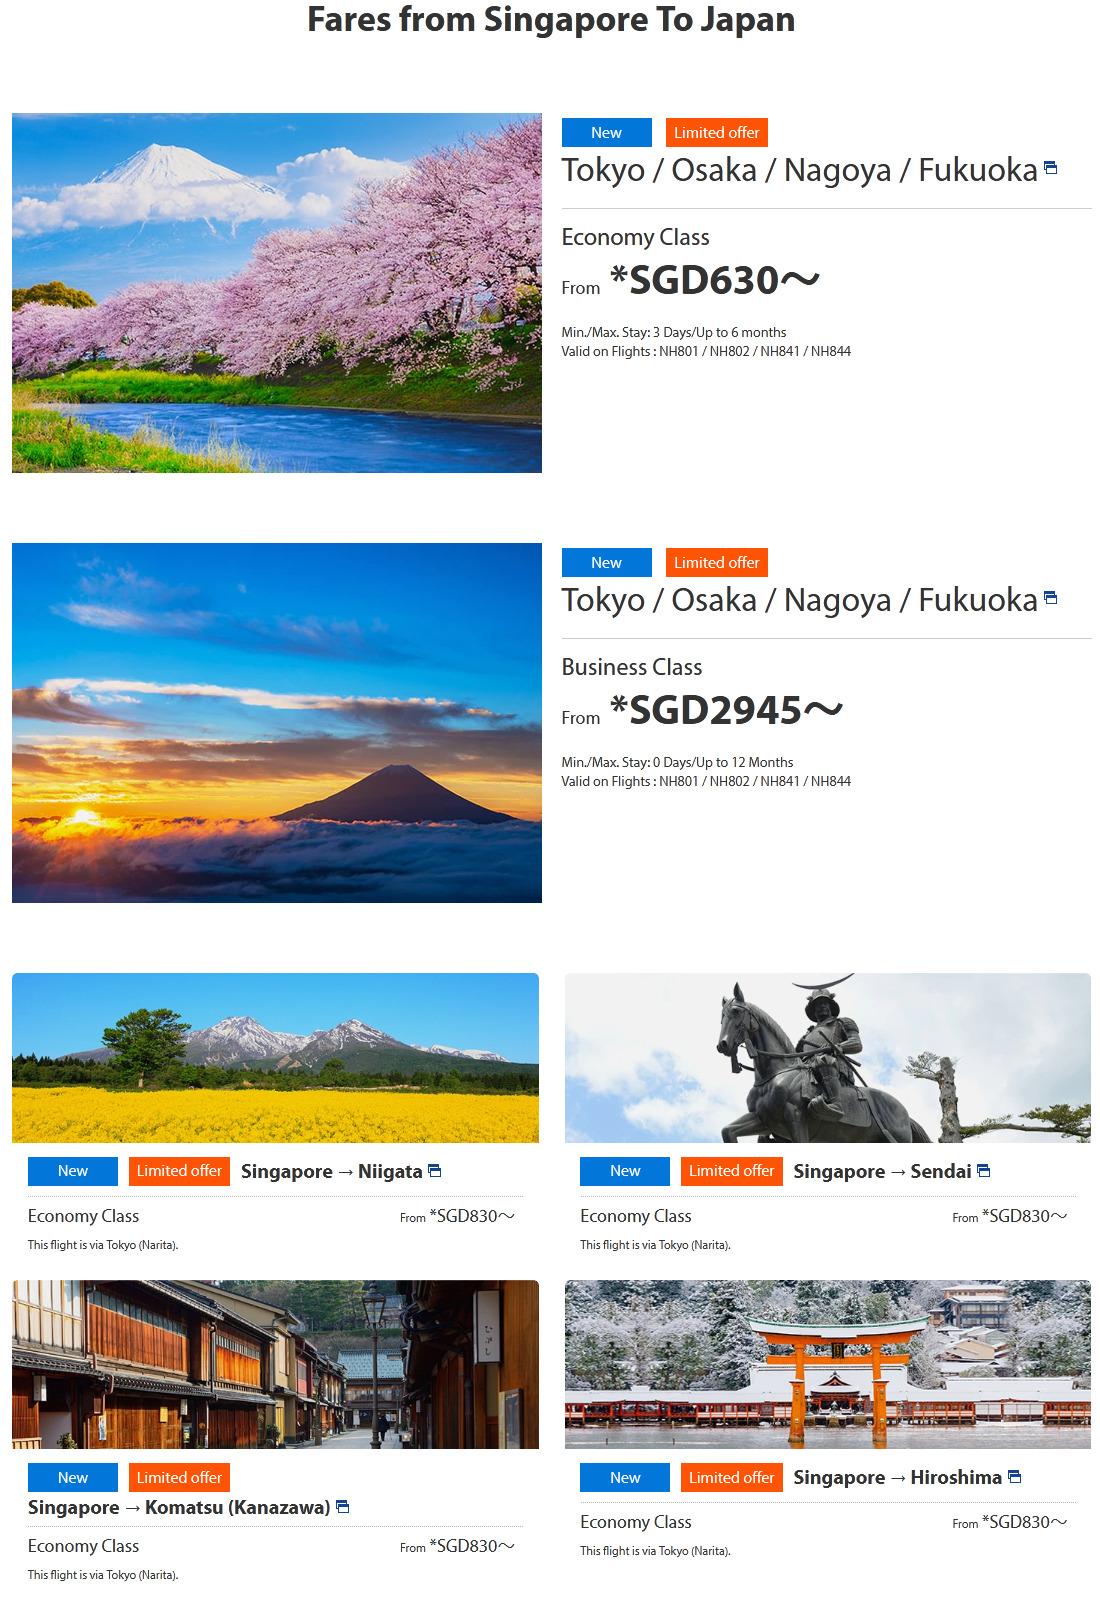 Singapore To Japan, Airfares From S$630 25 Dec 2020